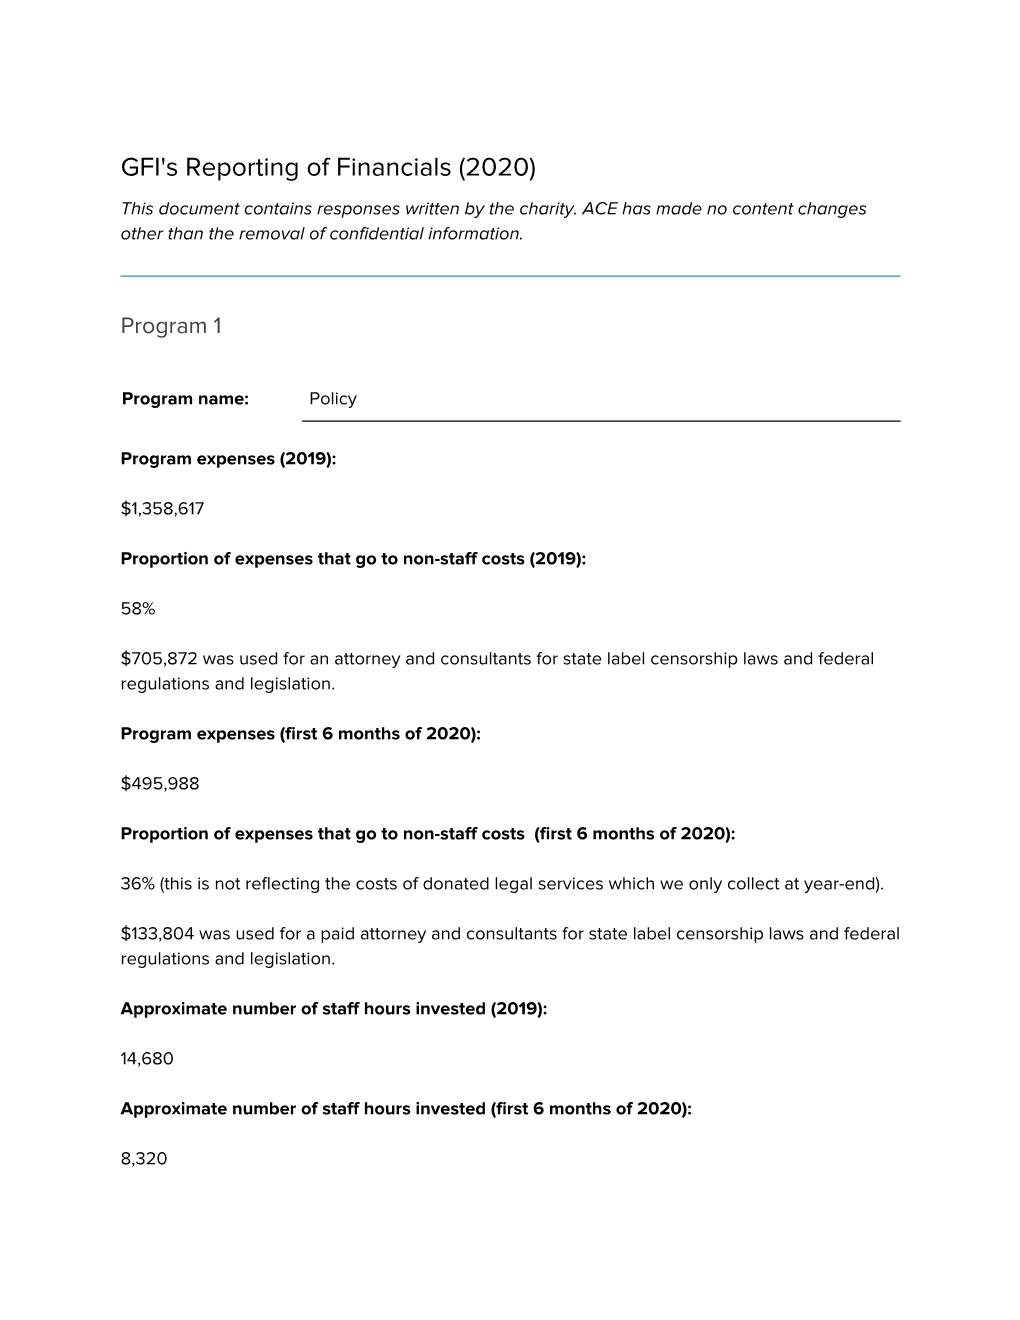 GFI's Reporting of Financials (2020) This Document Contains Responses Written by the Charity